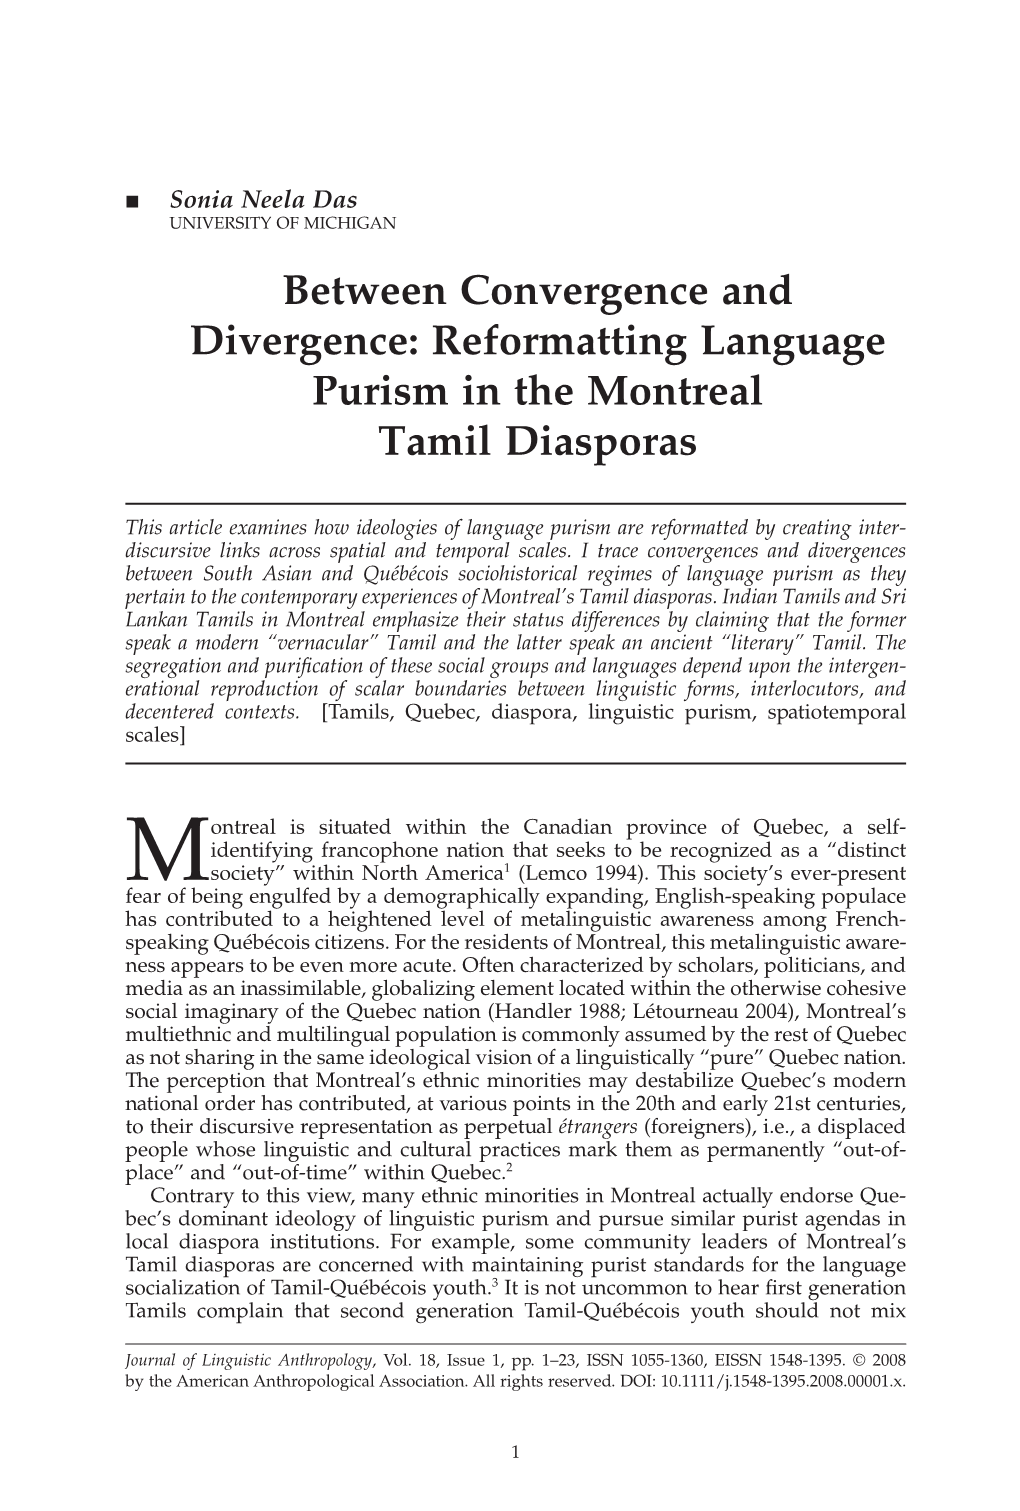 Between Convergence and Divergence: Reformatting Language Purism in the Montreal Tamil Diasporas